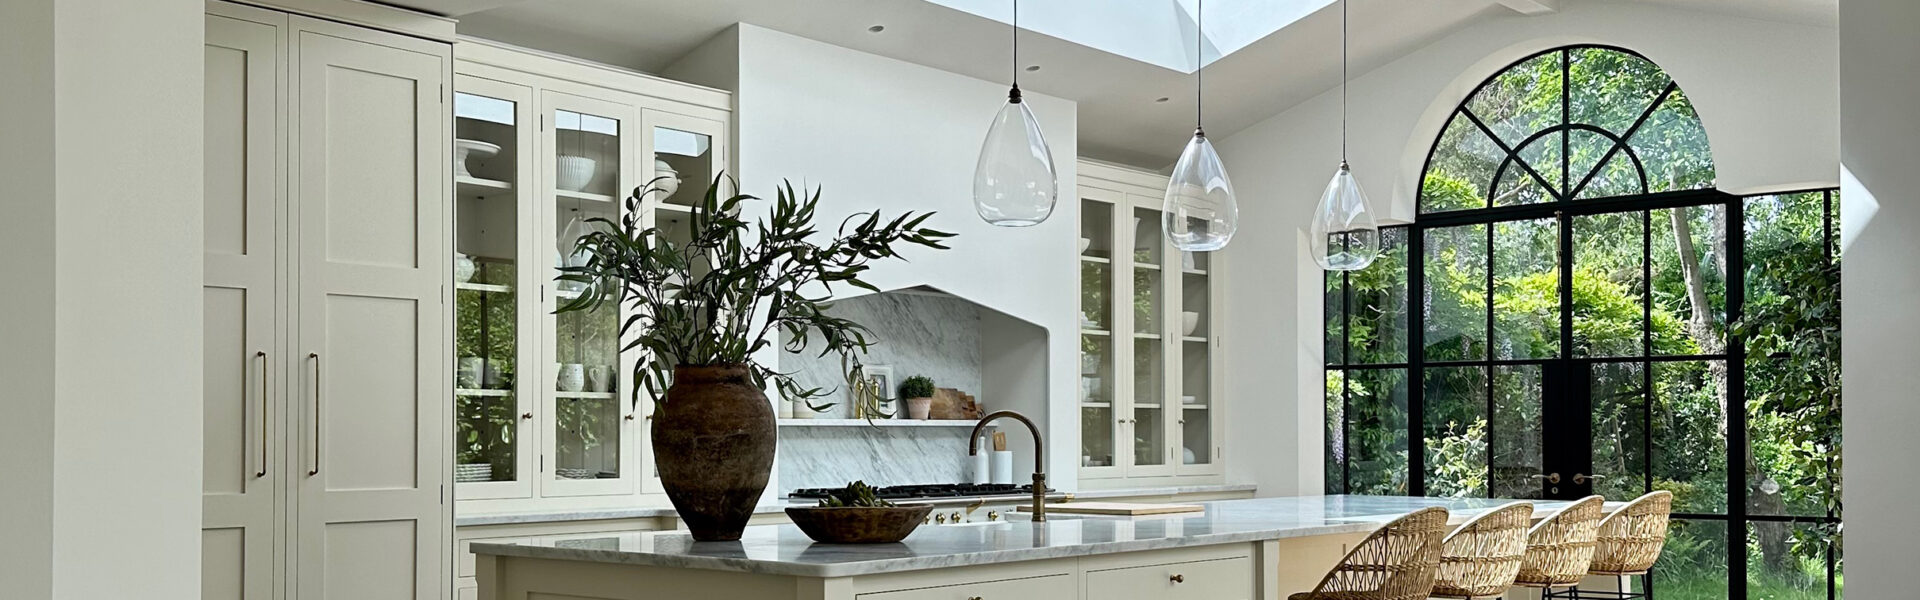 There are many types of lighting sold by Fritz Fryer, including glass pendant lights as shown in this image of 3 pendants over a kitchen island